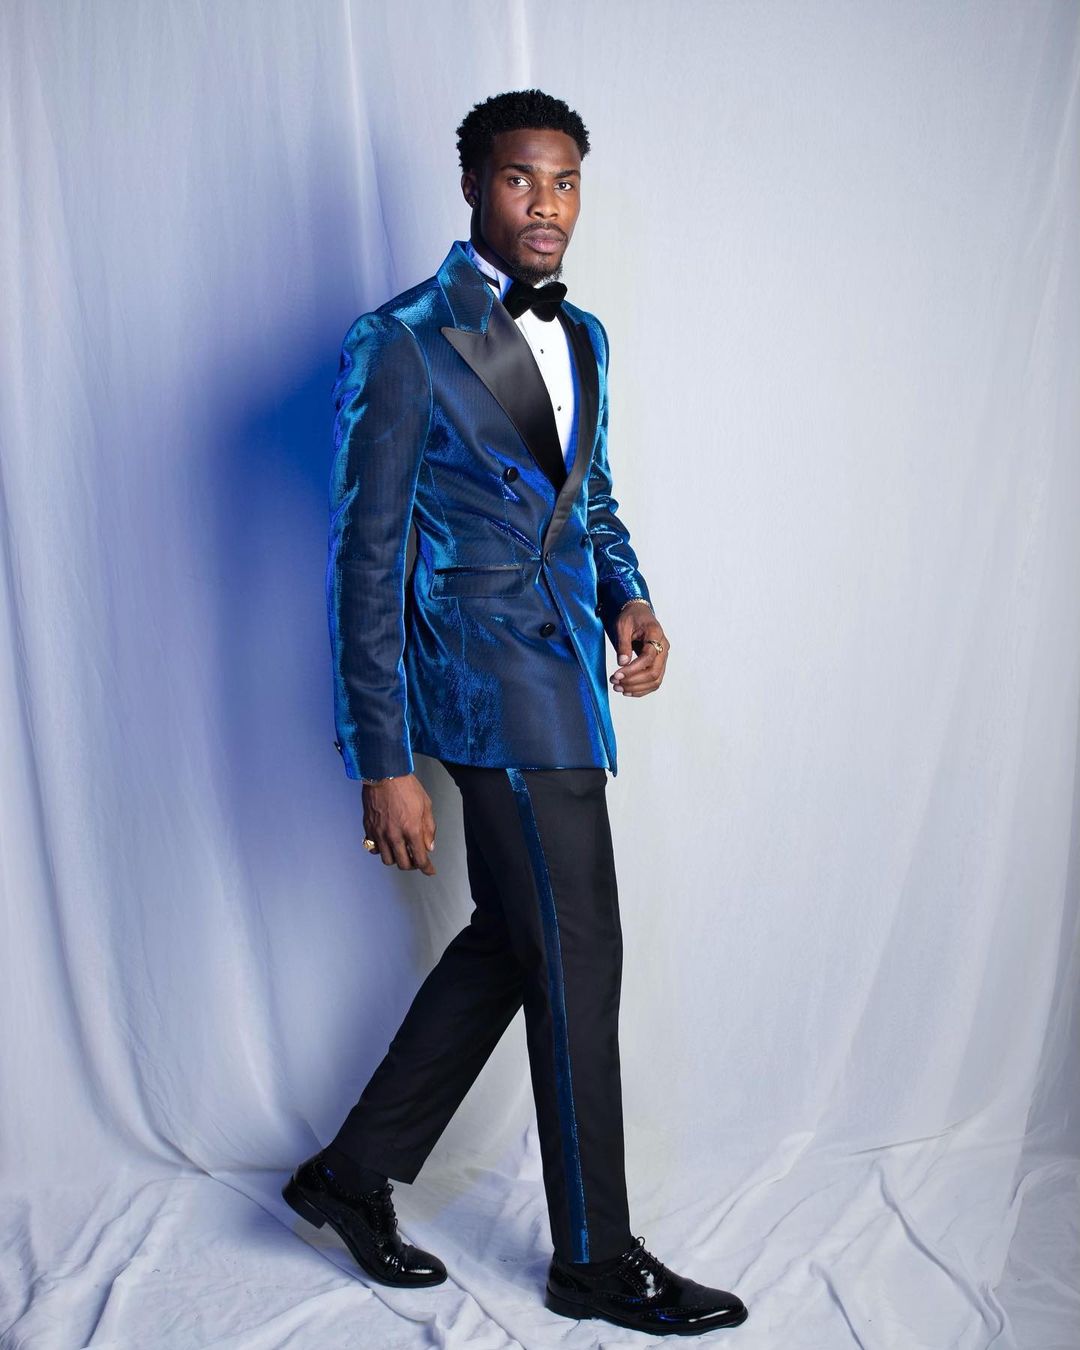 african-men-male-celebrities-style-fashion